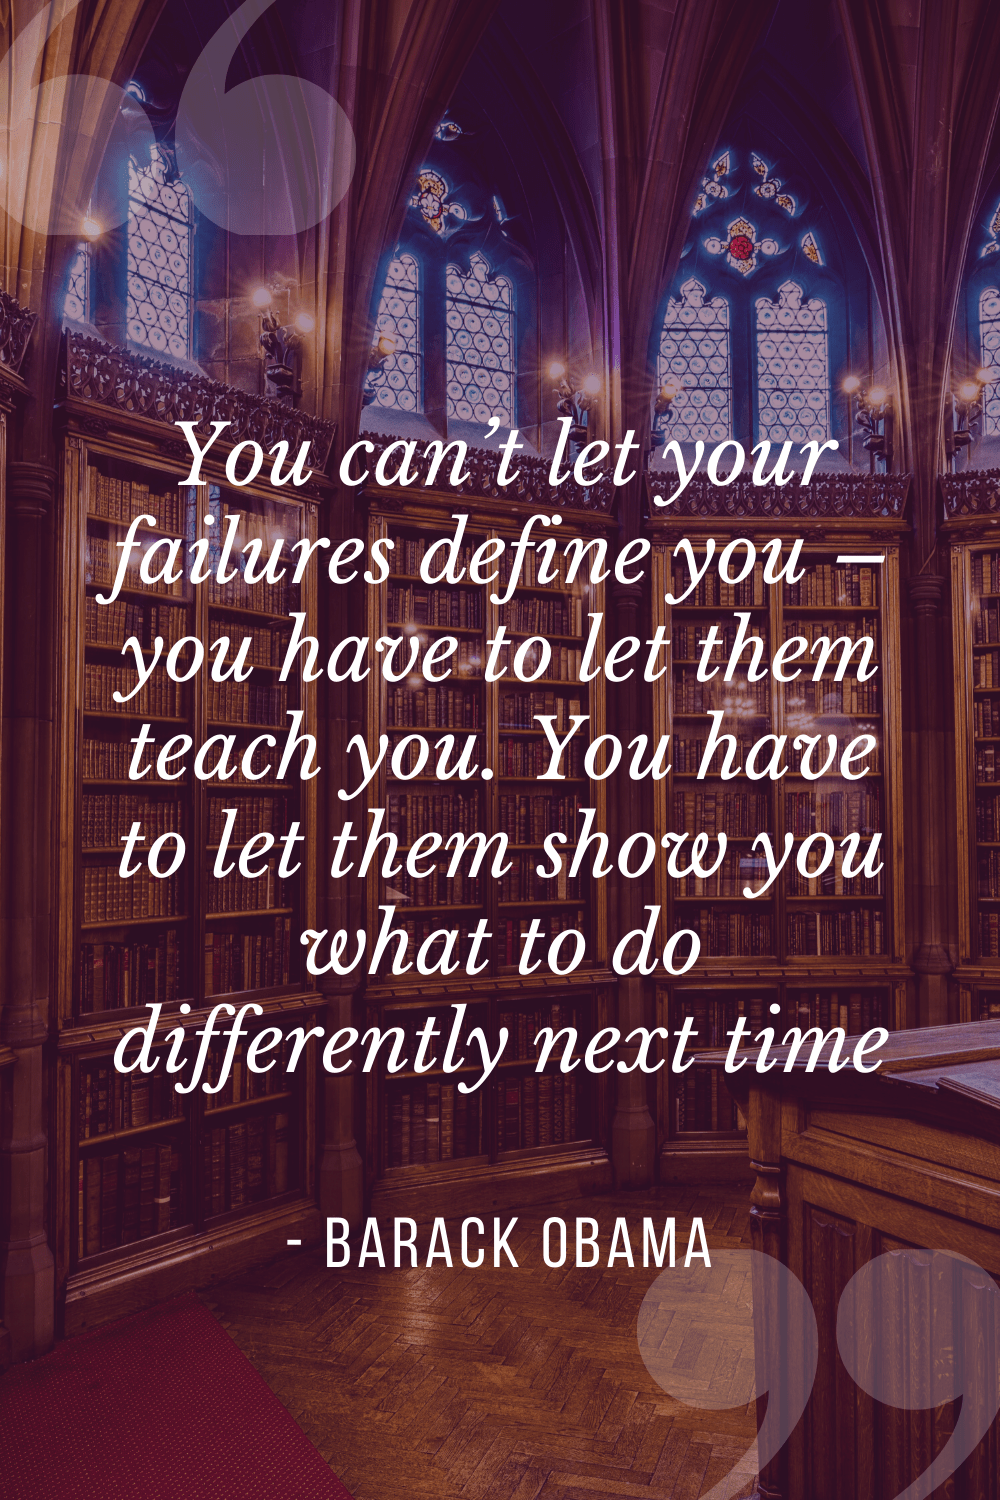 “You can’t let your failures define you – you have to let them teach you. You have to let them show you what to do differently next time”, Barack Obama